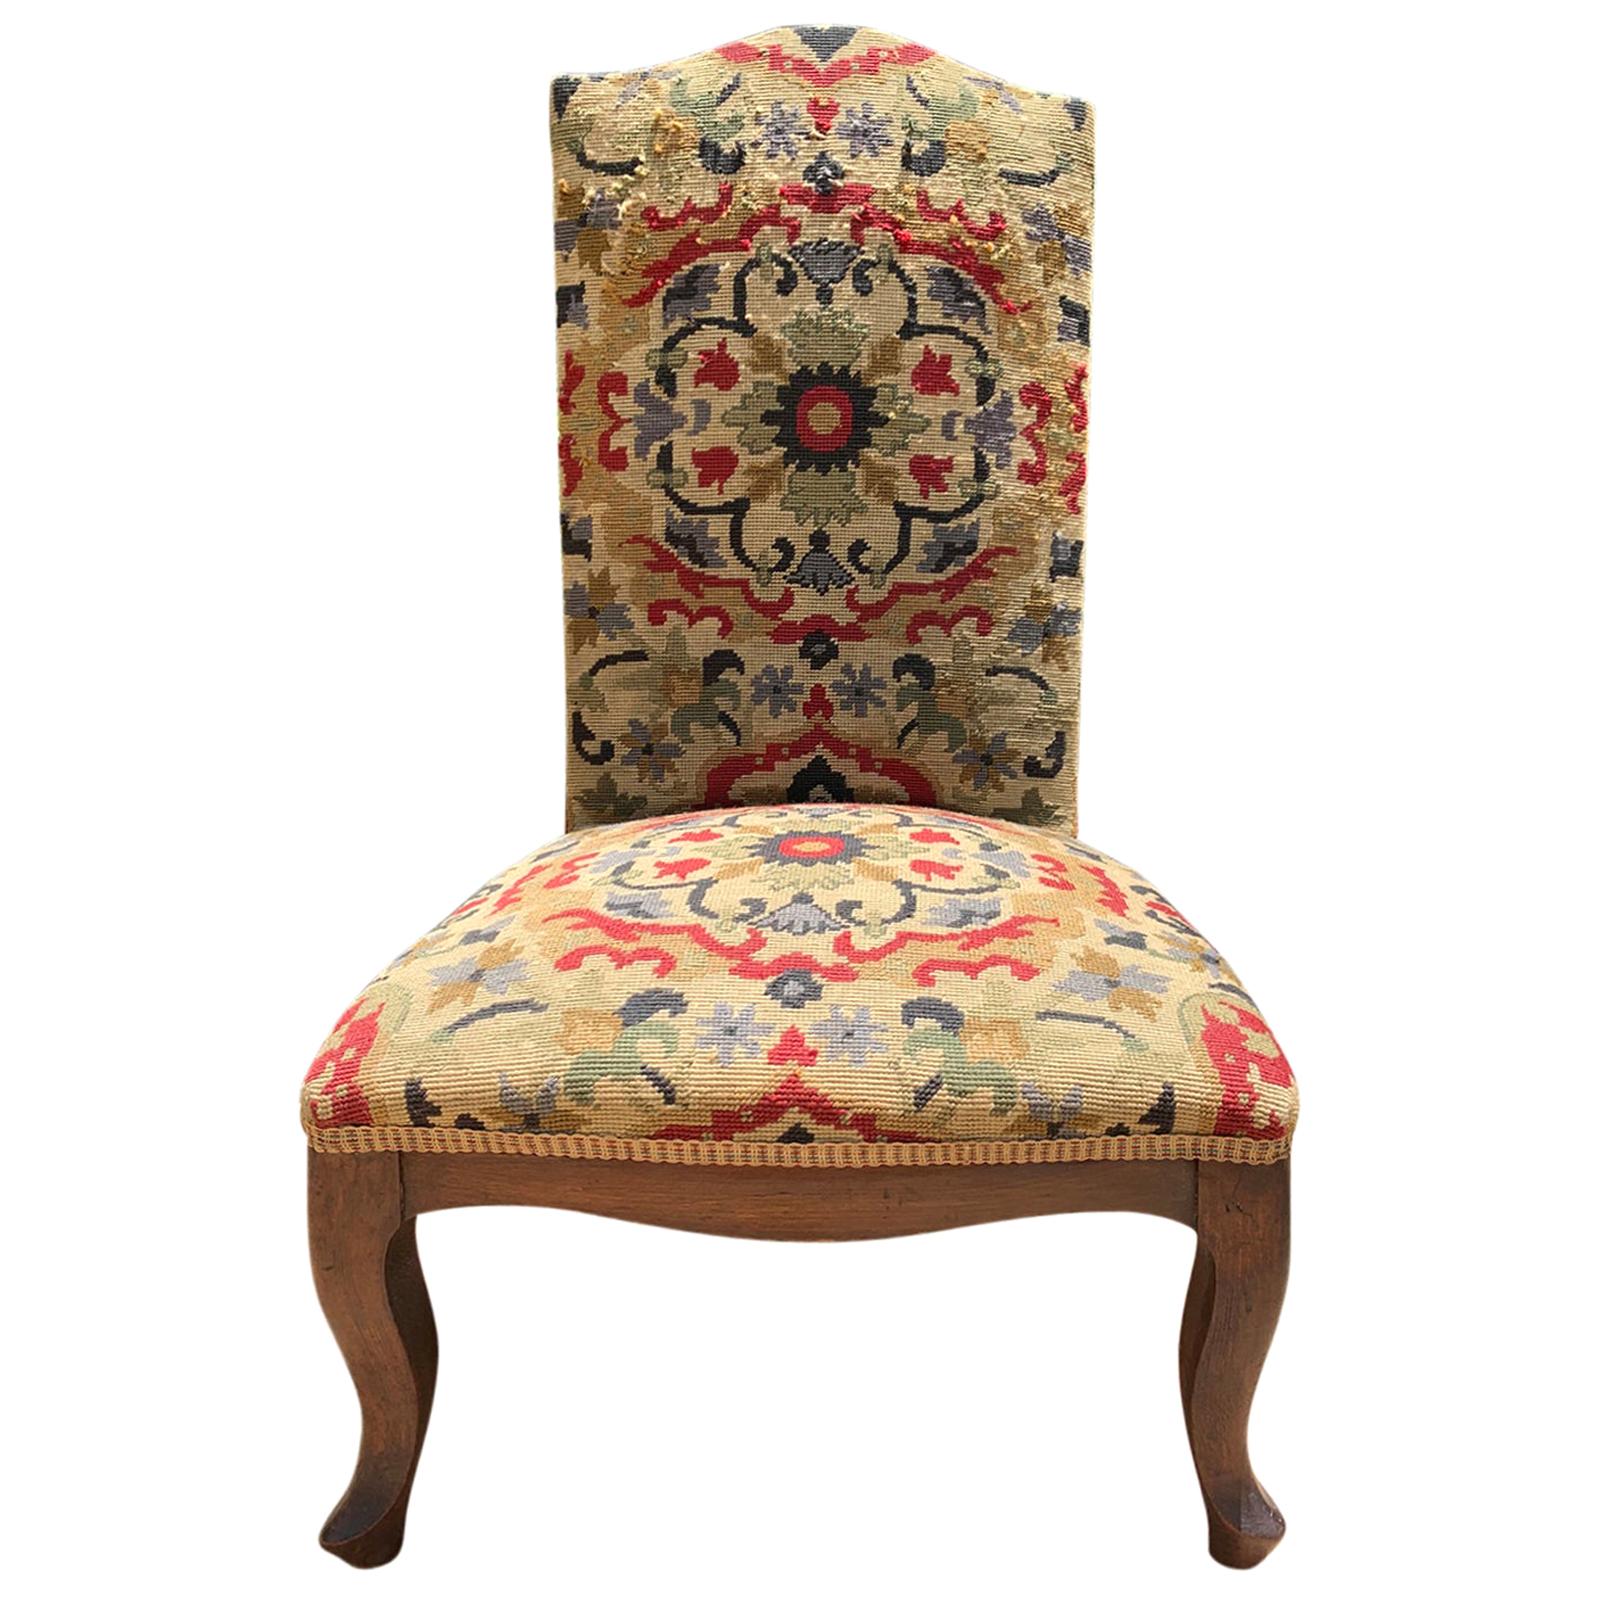 18th-19th Century French Walnut and Needlepoint Child's Chair